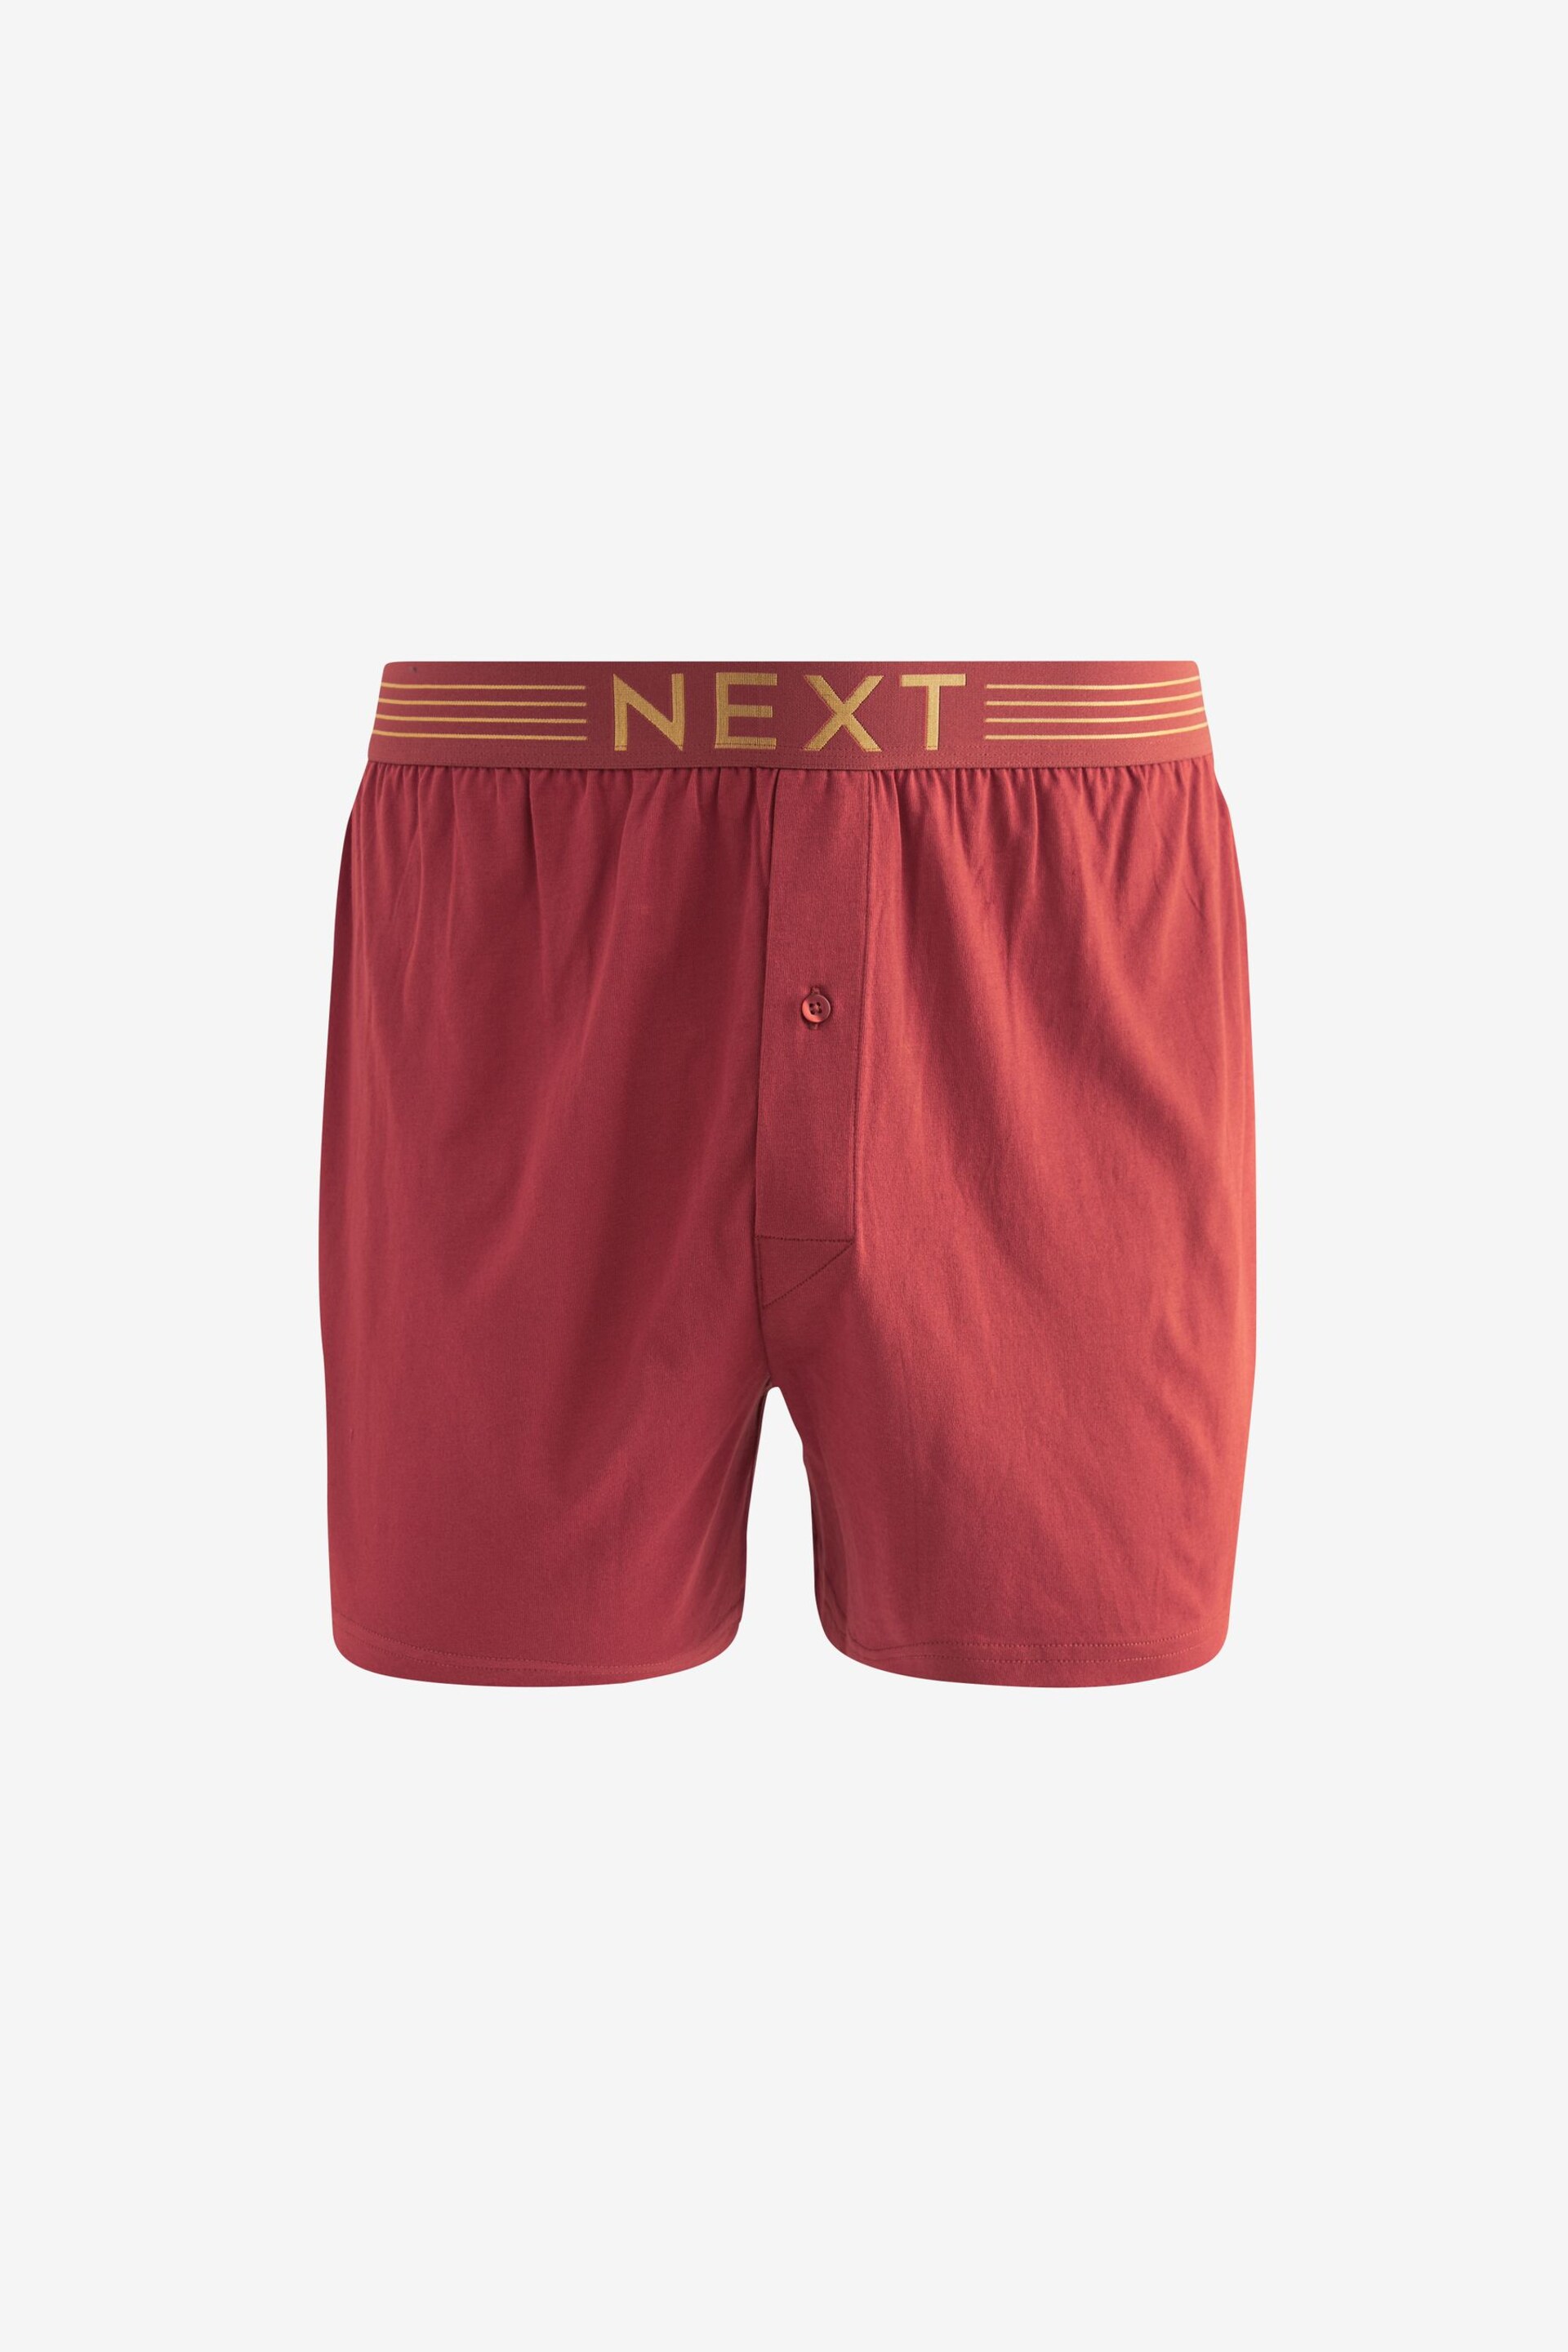 Rich Colour 10 pack Boxers - Image 9 of 13